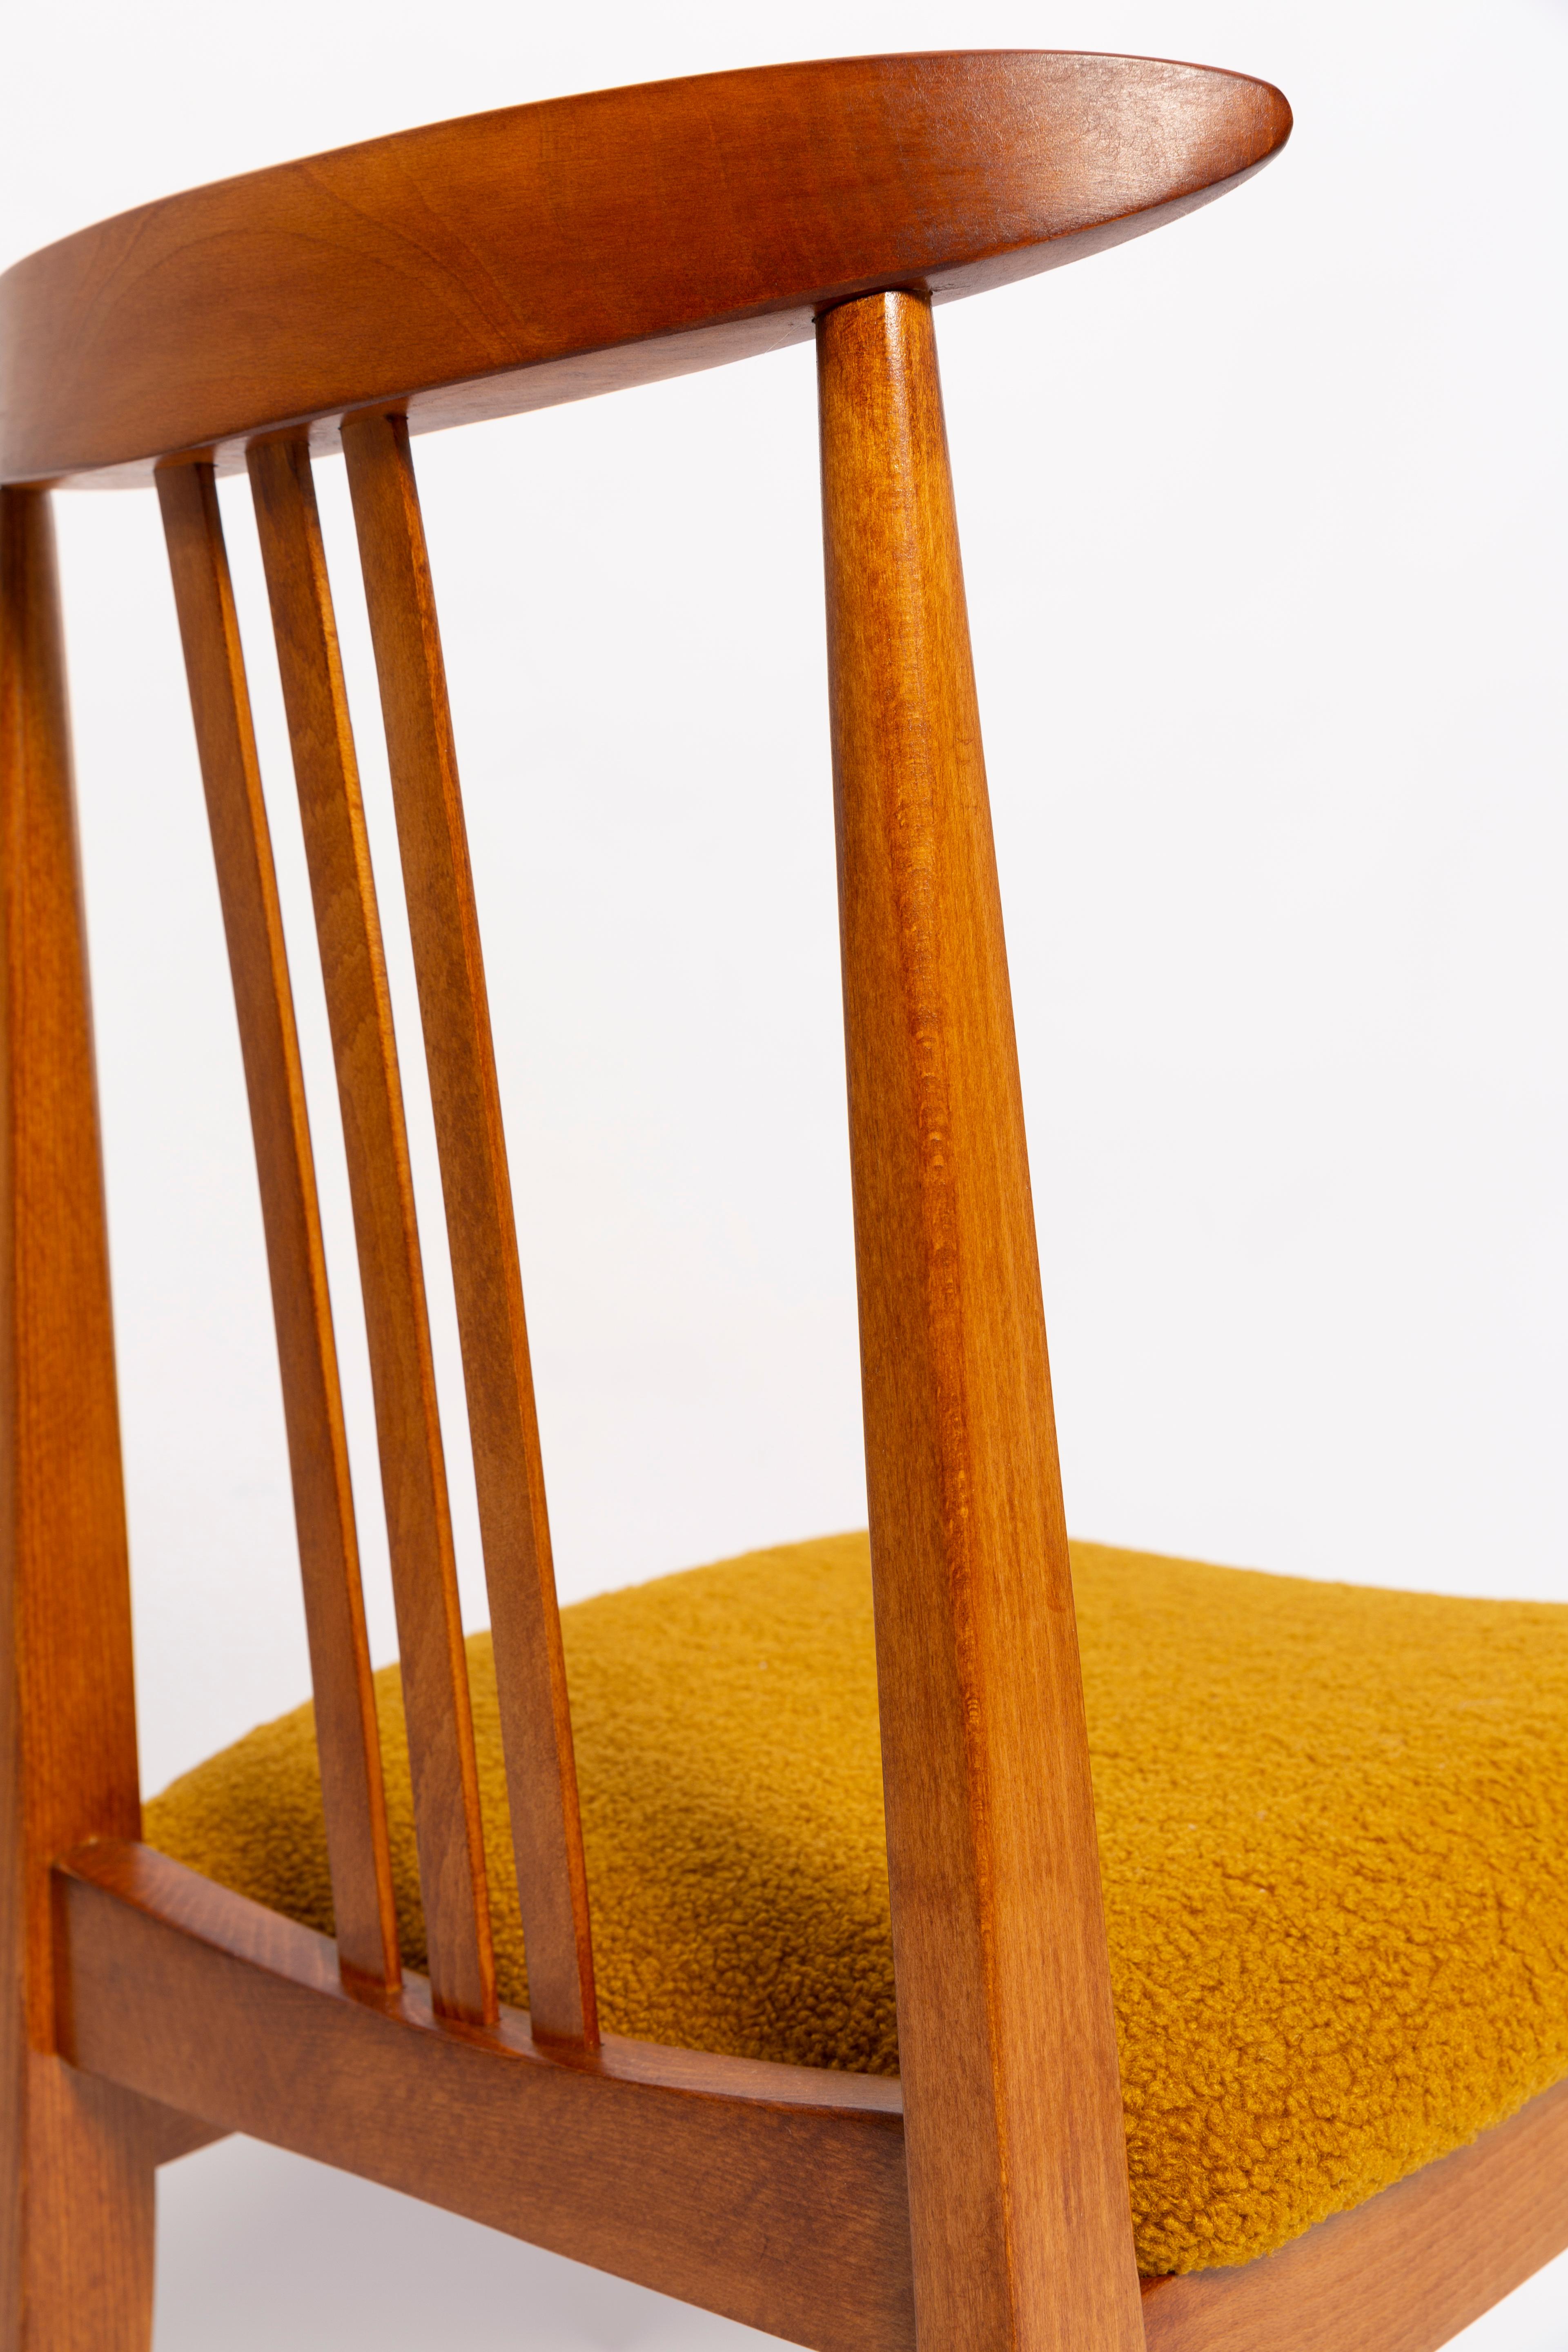 Hand-Crafted Mid-Century Ochre Boucle Chair, Medium Wood, M. Zielinski, Europe 1960s For Sale